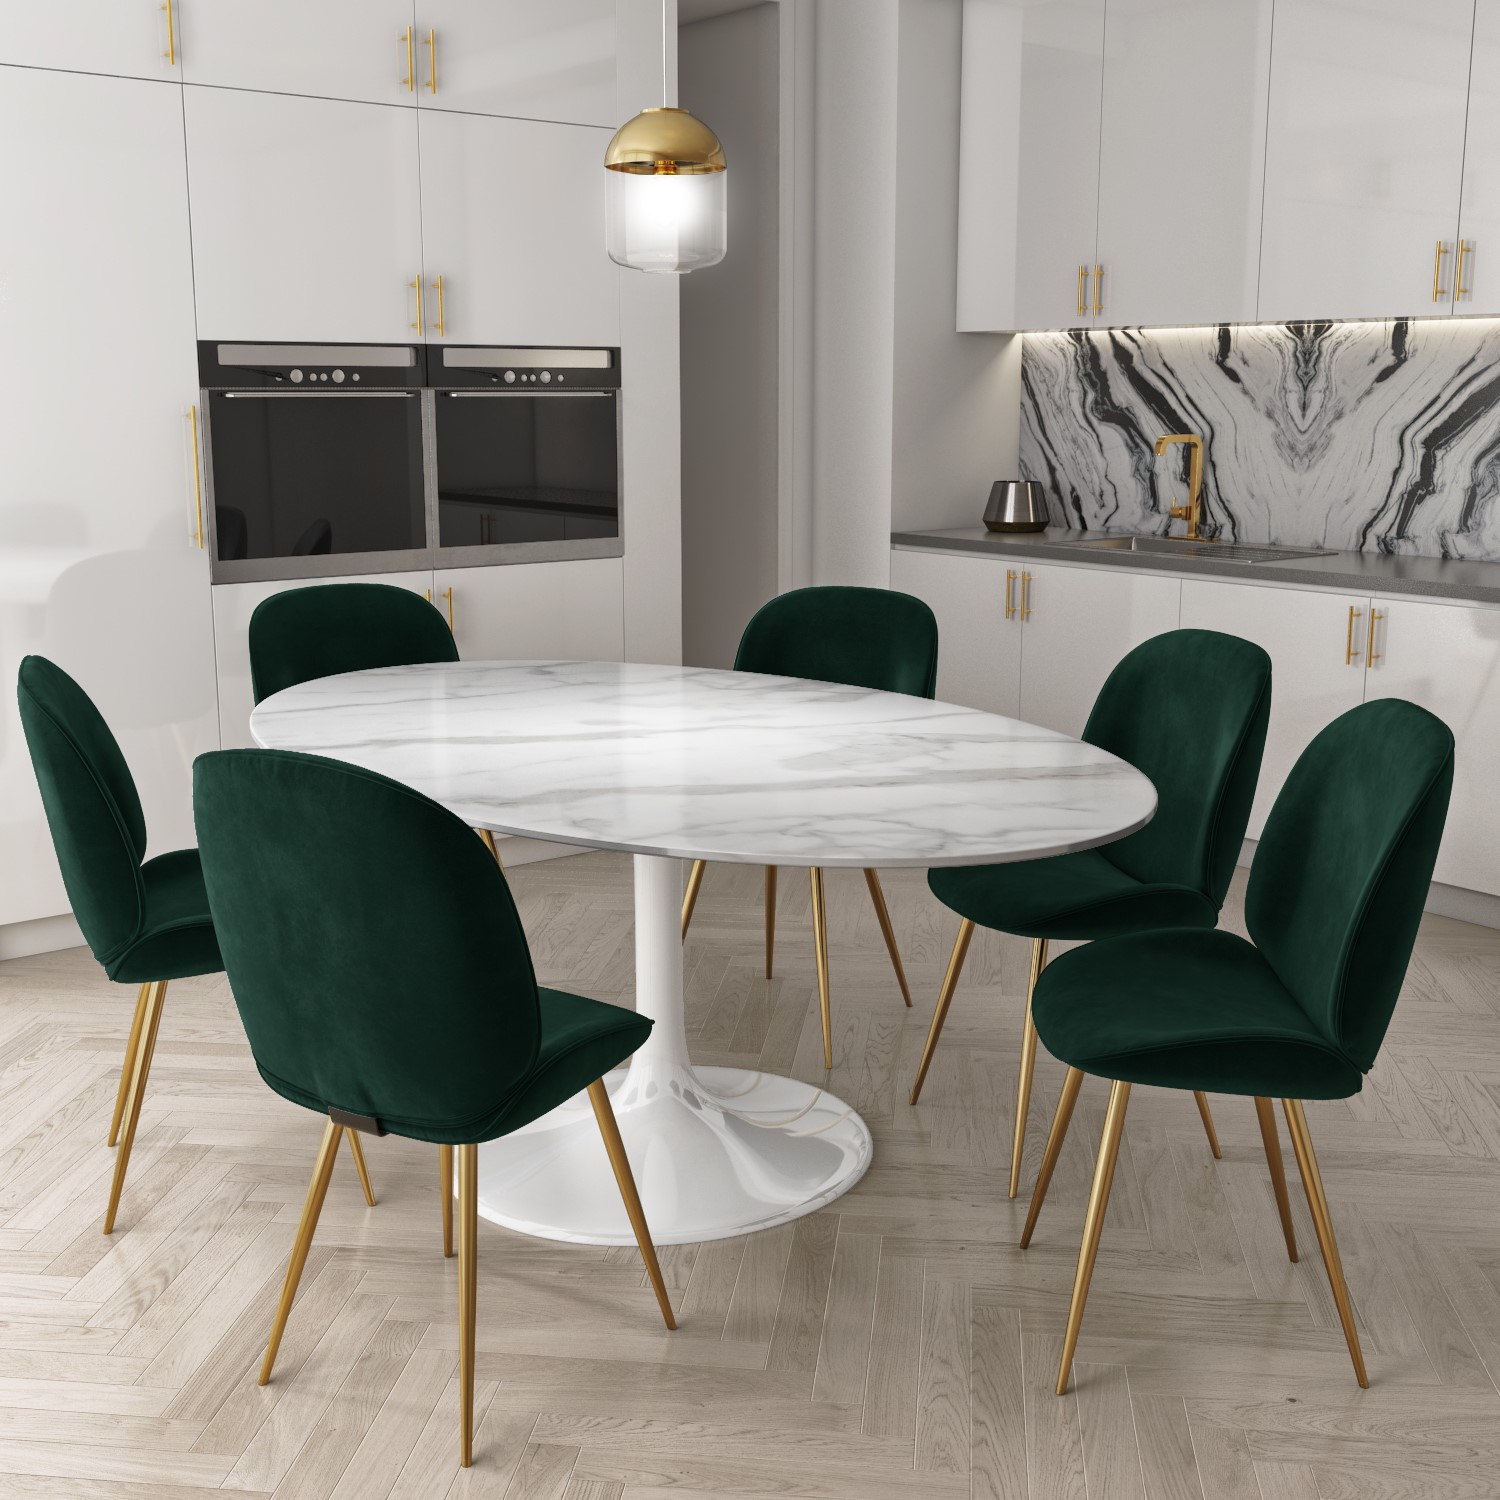 White Marble Oval Pedestal Dining Table With 6 Dining Chairs In Dark Green Furniture123